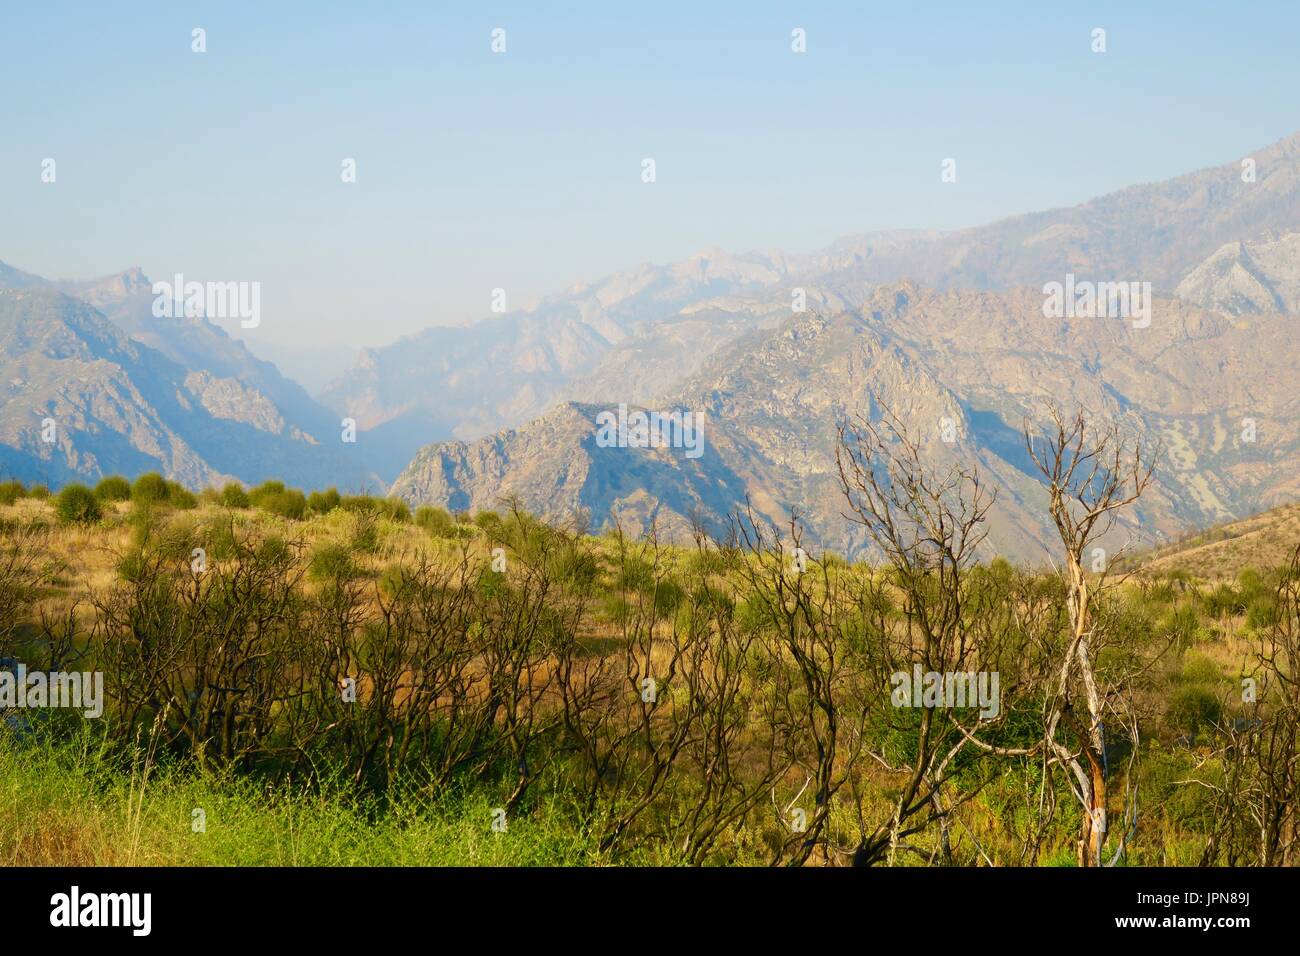 Looking out over Kings Canyon with dry brush in foreground, Sequoia National Monument, Hume, California, United States Stock Photo